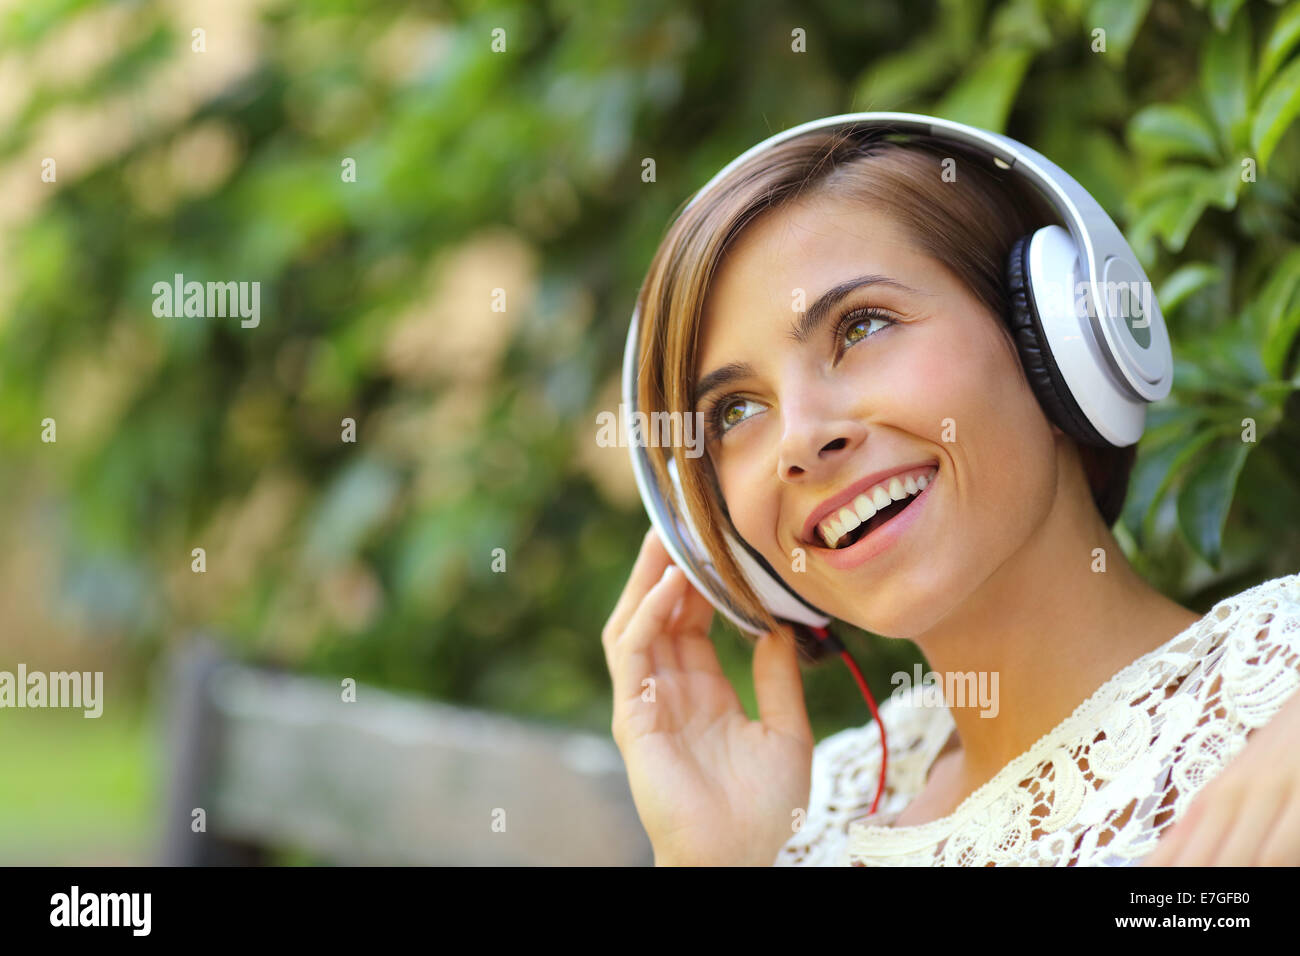 Girl listening to the music with headphones in a park with a green blurred background Stock Photo